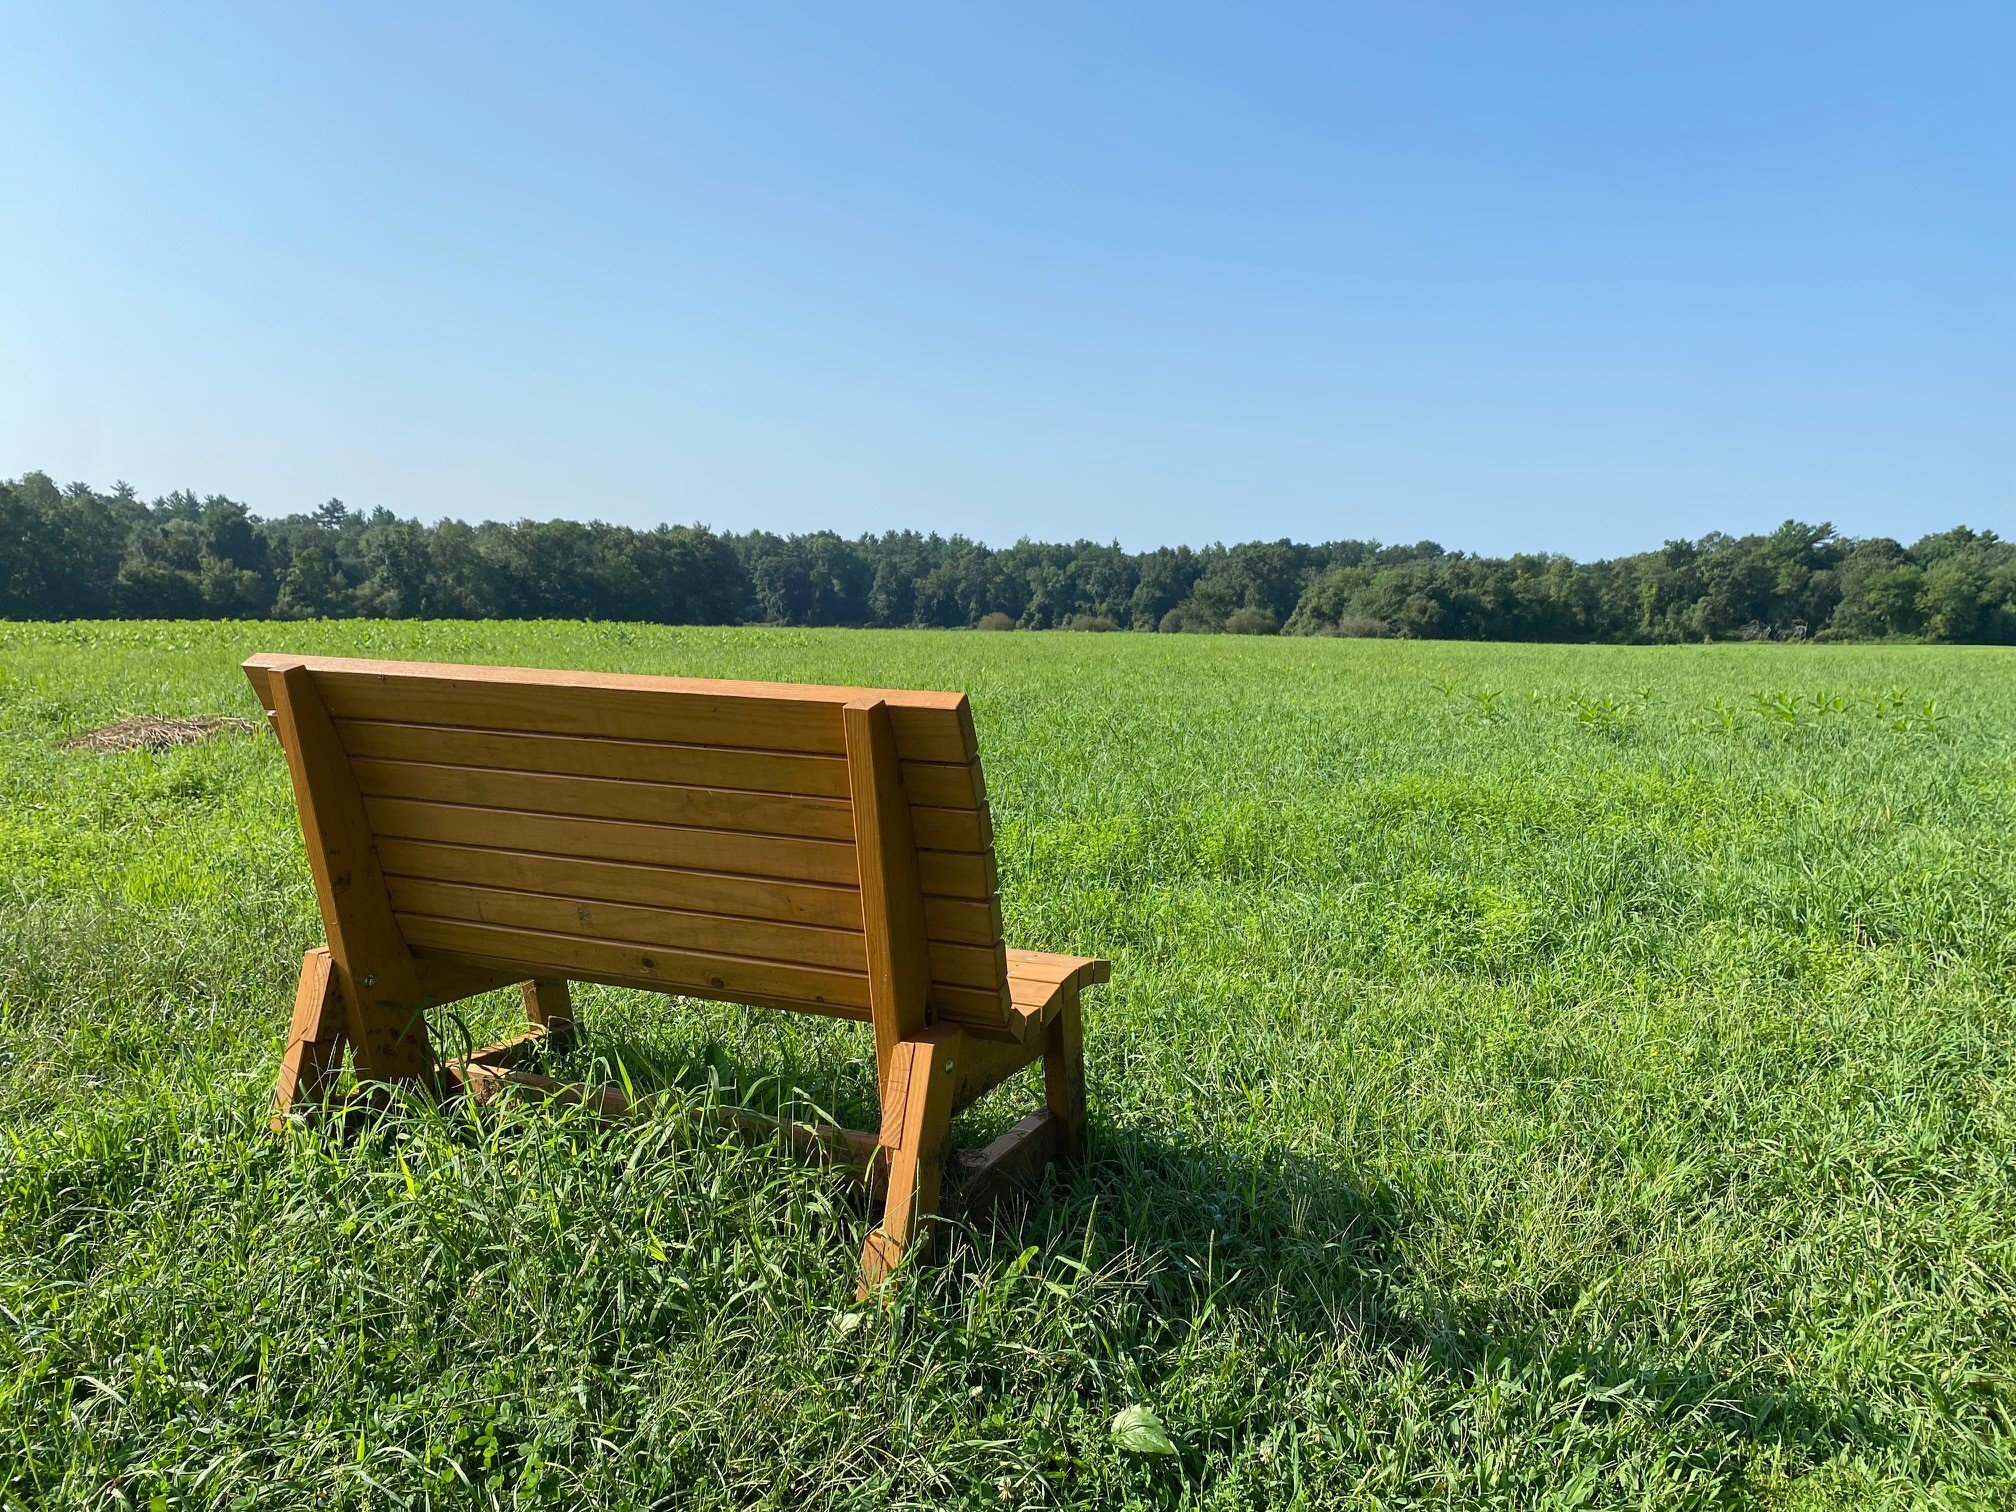  Wooden bench overlooking a green grassy field and clear blue skies 